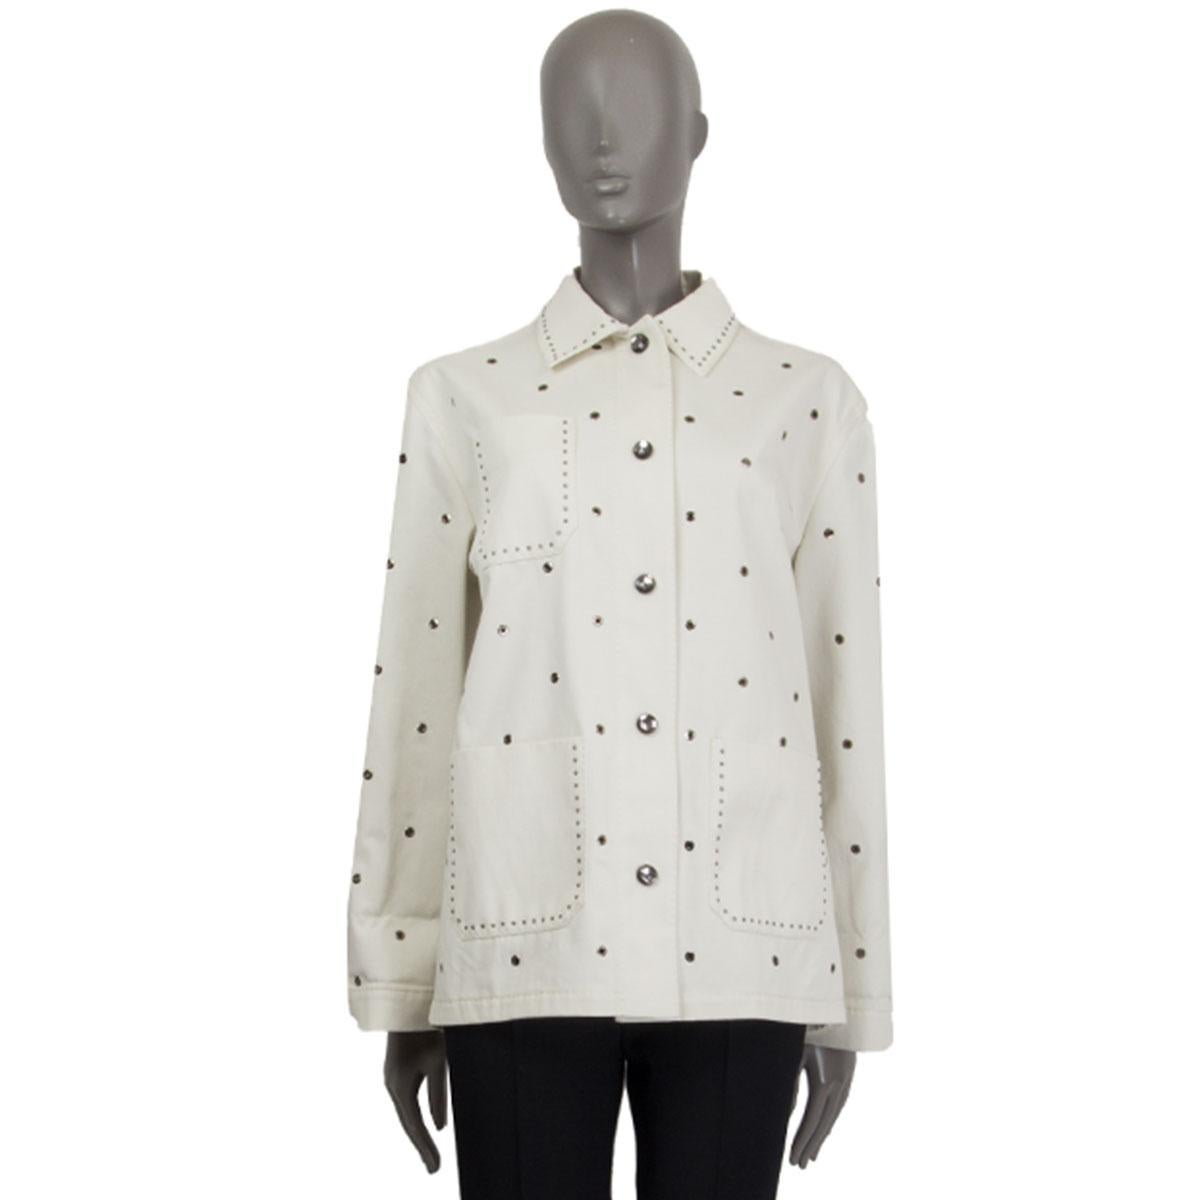 100% authentic Bottega Veneta eyelet-detail jacket in beige cotton twill (100%) and brass applications (100%) with tree flat pockets on the front. Closes with buttons on the front. Unlined. Has been worn and is in excellent condition.

Tag Size